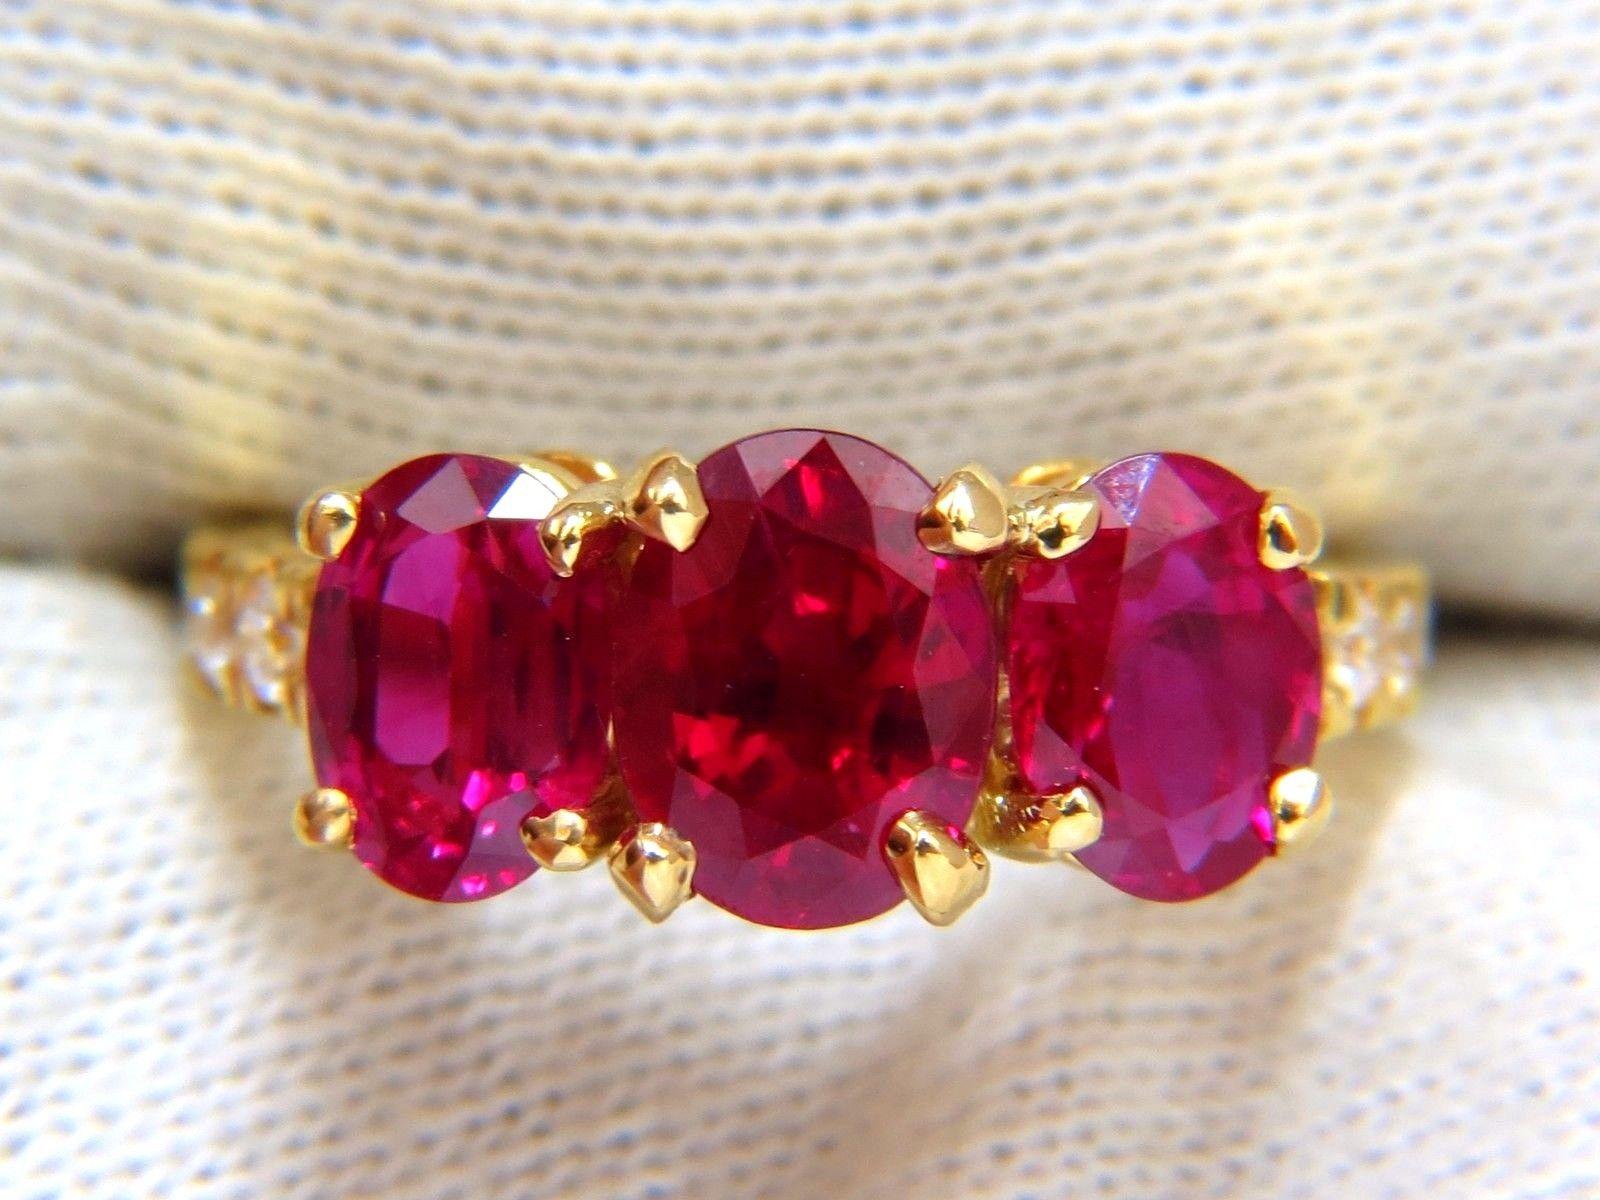 GIA Certified Ruby & Diamonds ring.

Classic Three's

All Rubies are certified & origin.

2.11ct. Oval Bright Red Ruby

Report: 2173413005

(VS) Clean Clarity & Transparent.

7.97 X 6.16 X 5mm

GIA: Heat 

Side (2) Rubies:

1.05 & 1.08ct. Oval